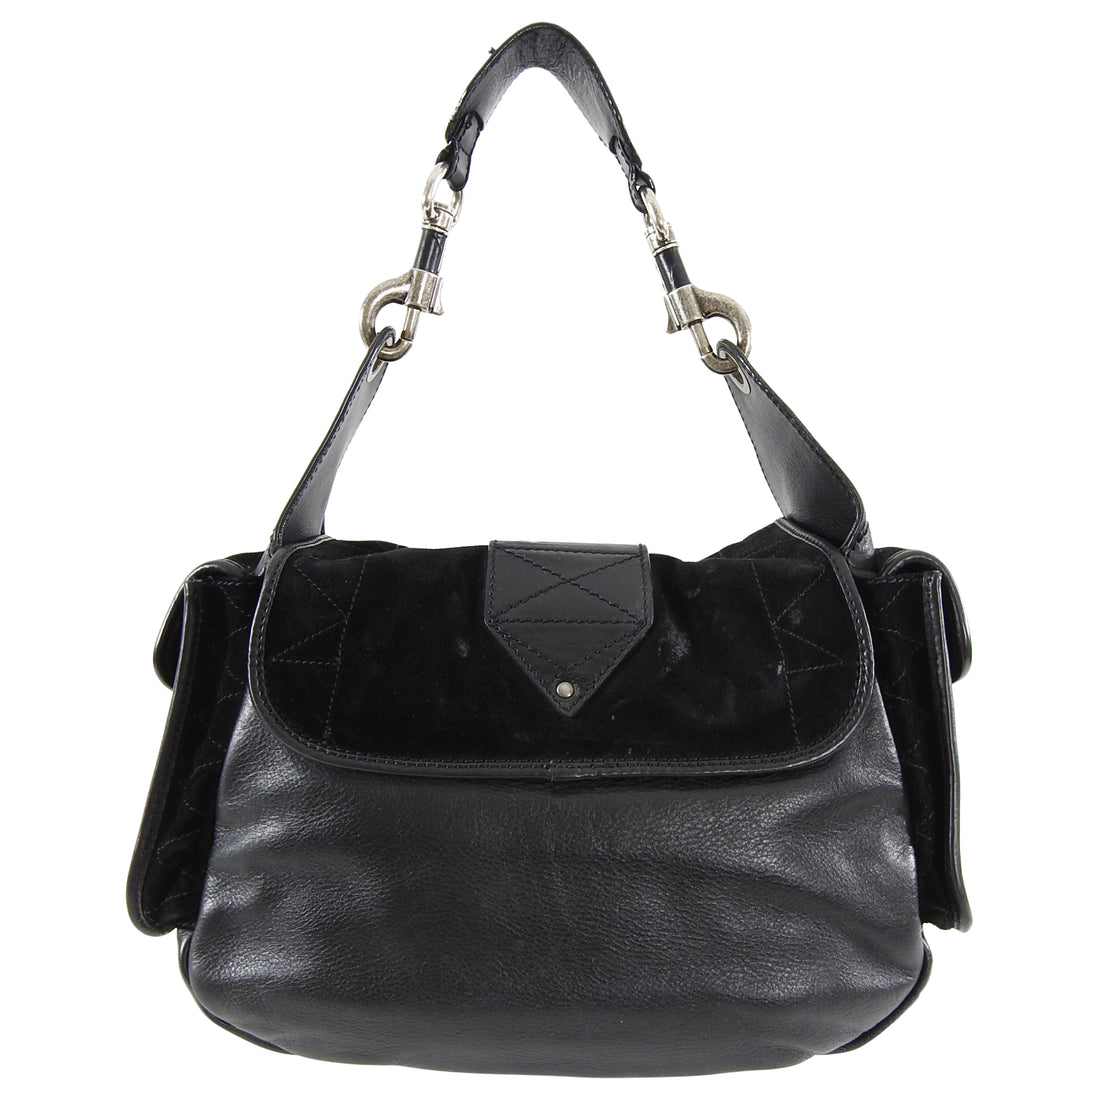 Christian Dior Rebelle Black Suede and Leather Bag